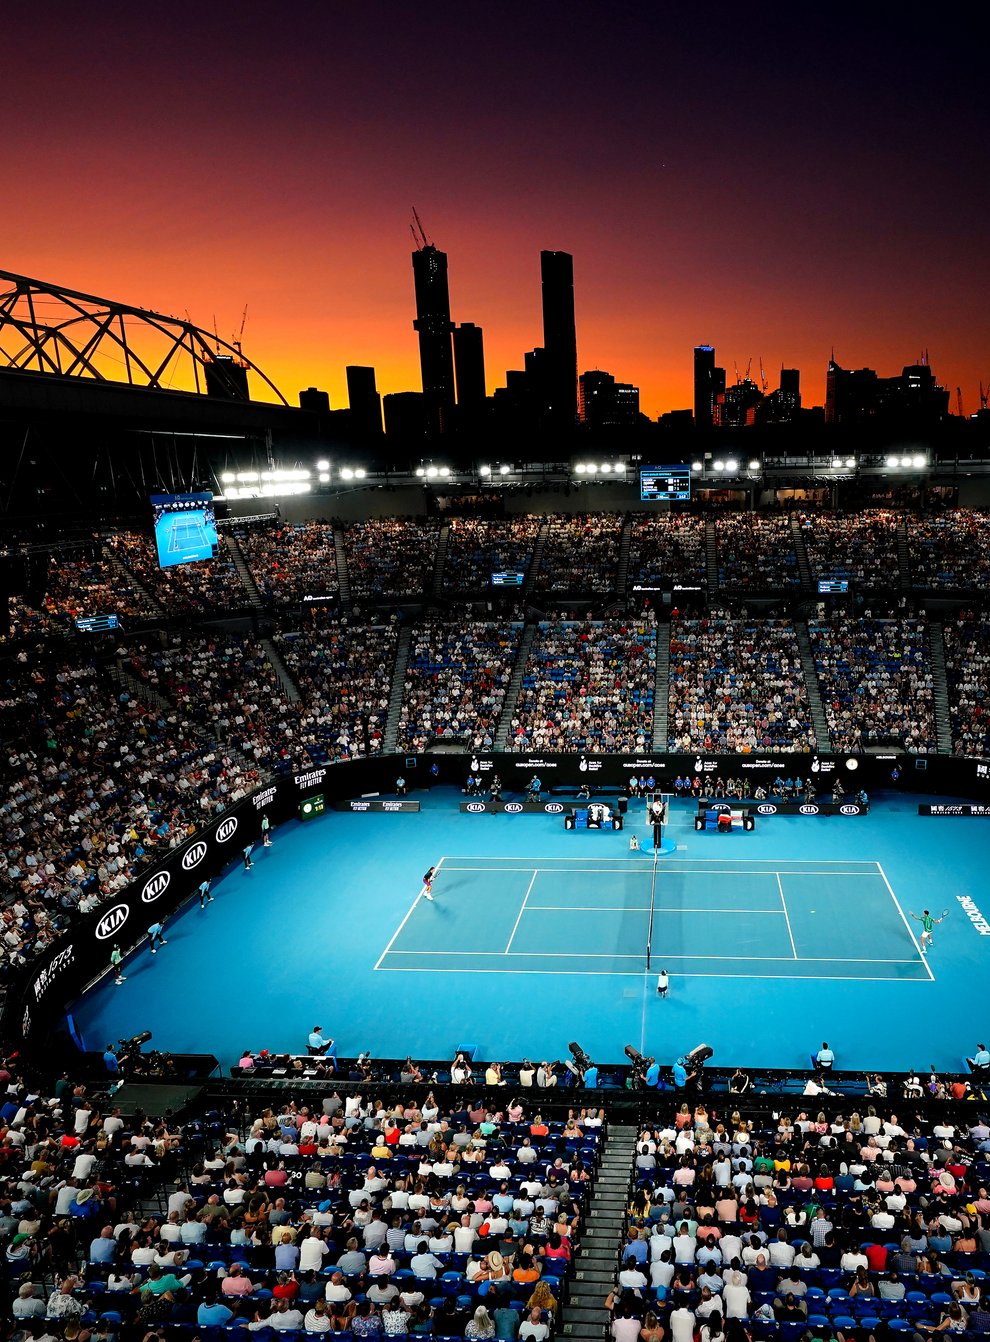 The Rod Laver Arena will play host to the women's final in Melbourne on Saturday (PA Images)